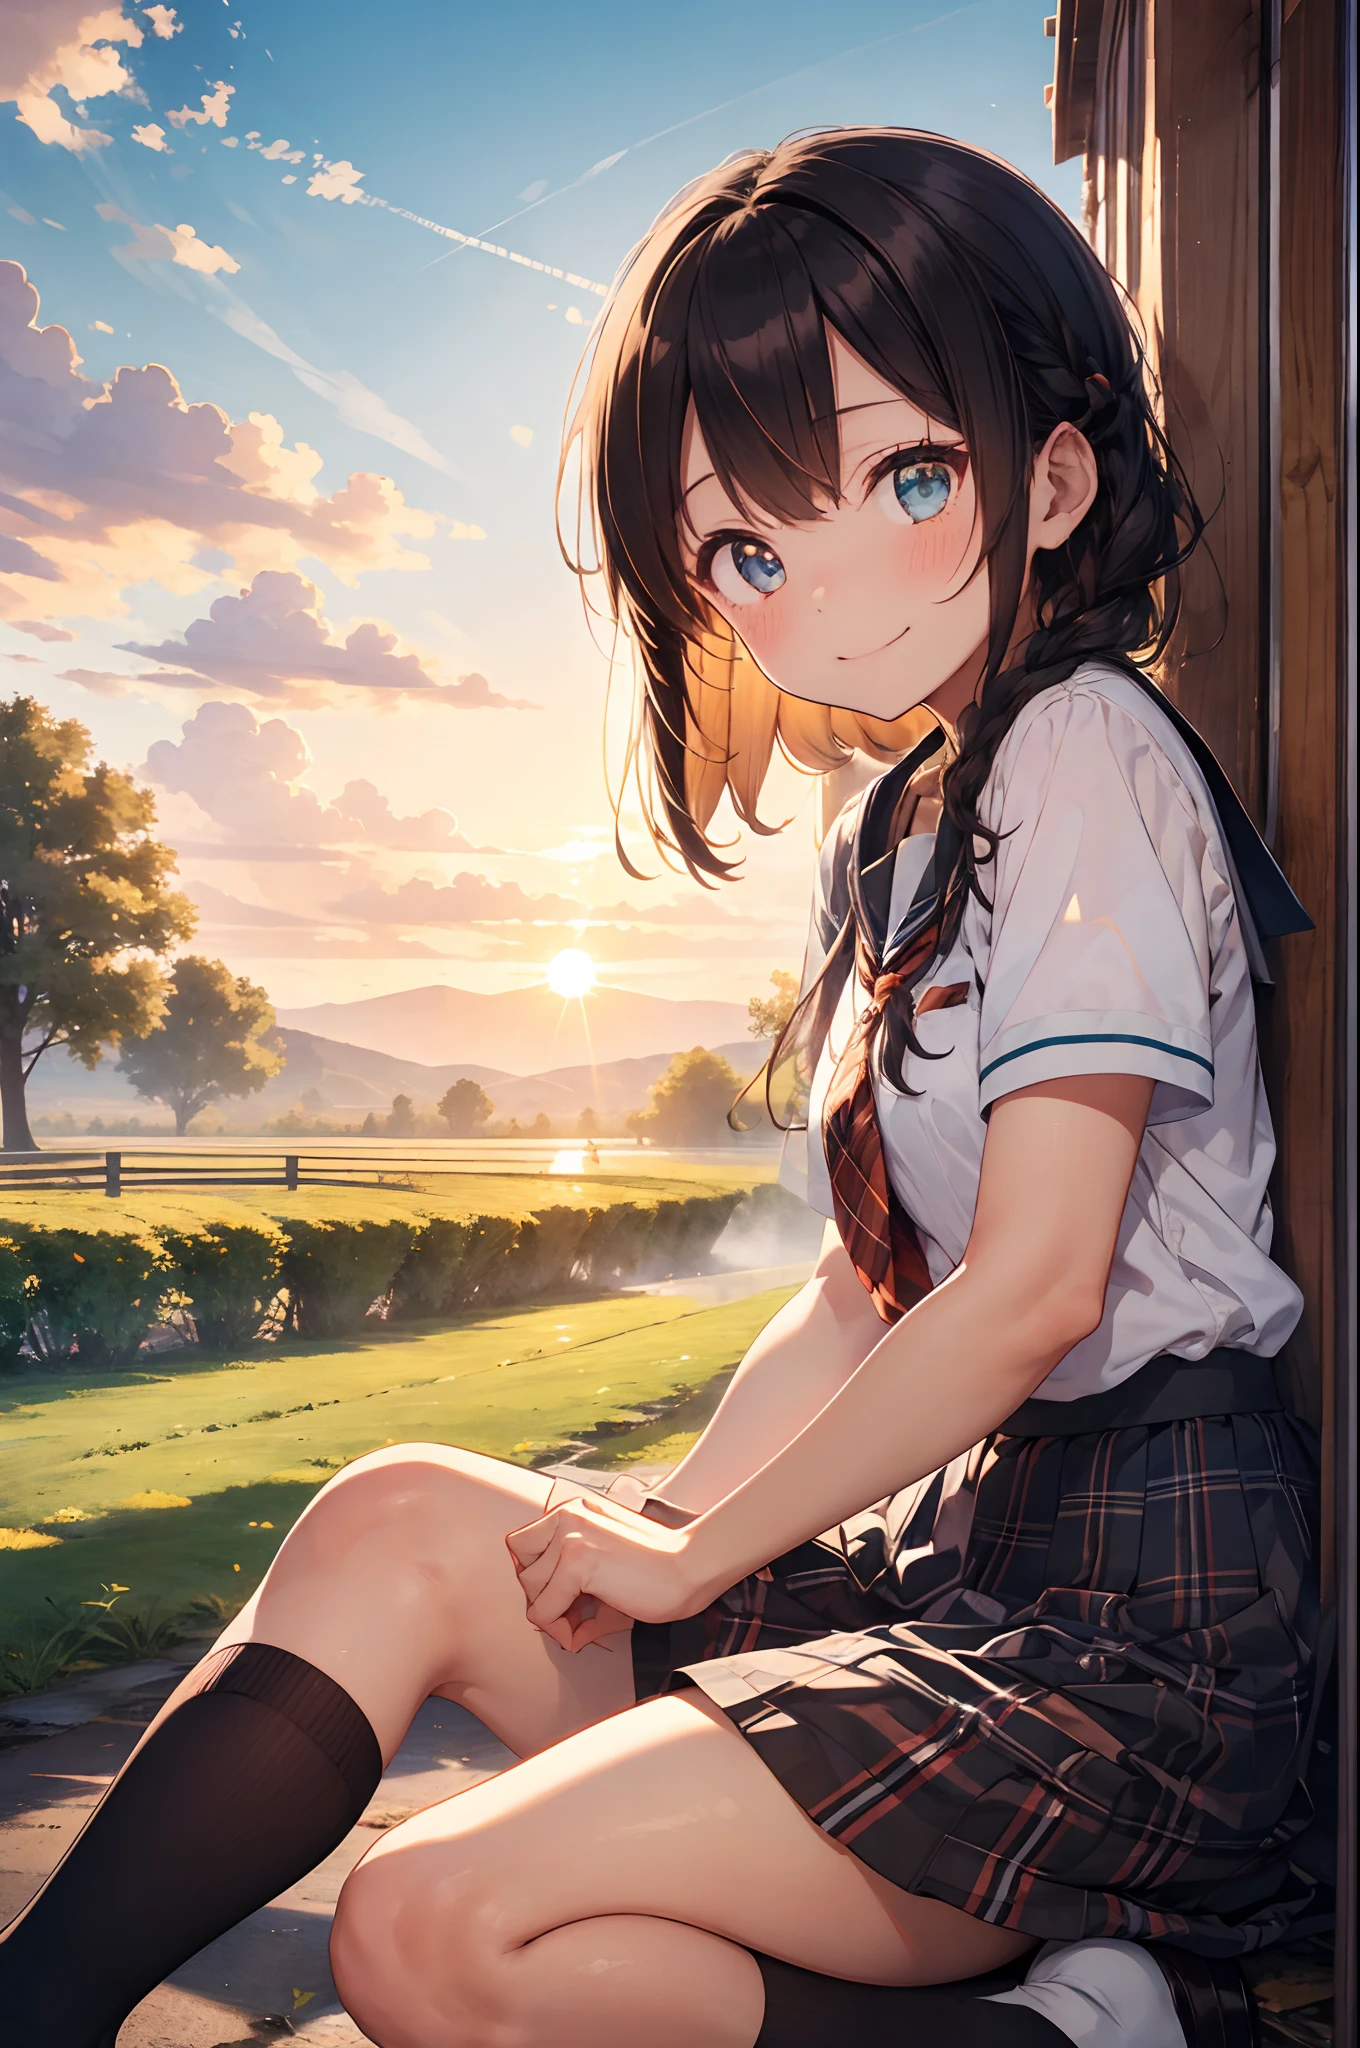 top-quality、Masterpiece、1womanl、solo、20yr old、low angle、(cyan eyes:1.1)、happy smile、closes mouth、brown single braid、white 、Black Socks、plaid skirt、blushing、Akame、early evening、Lots of countryside、Big sunset、Orange view、Small necklace、